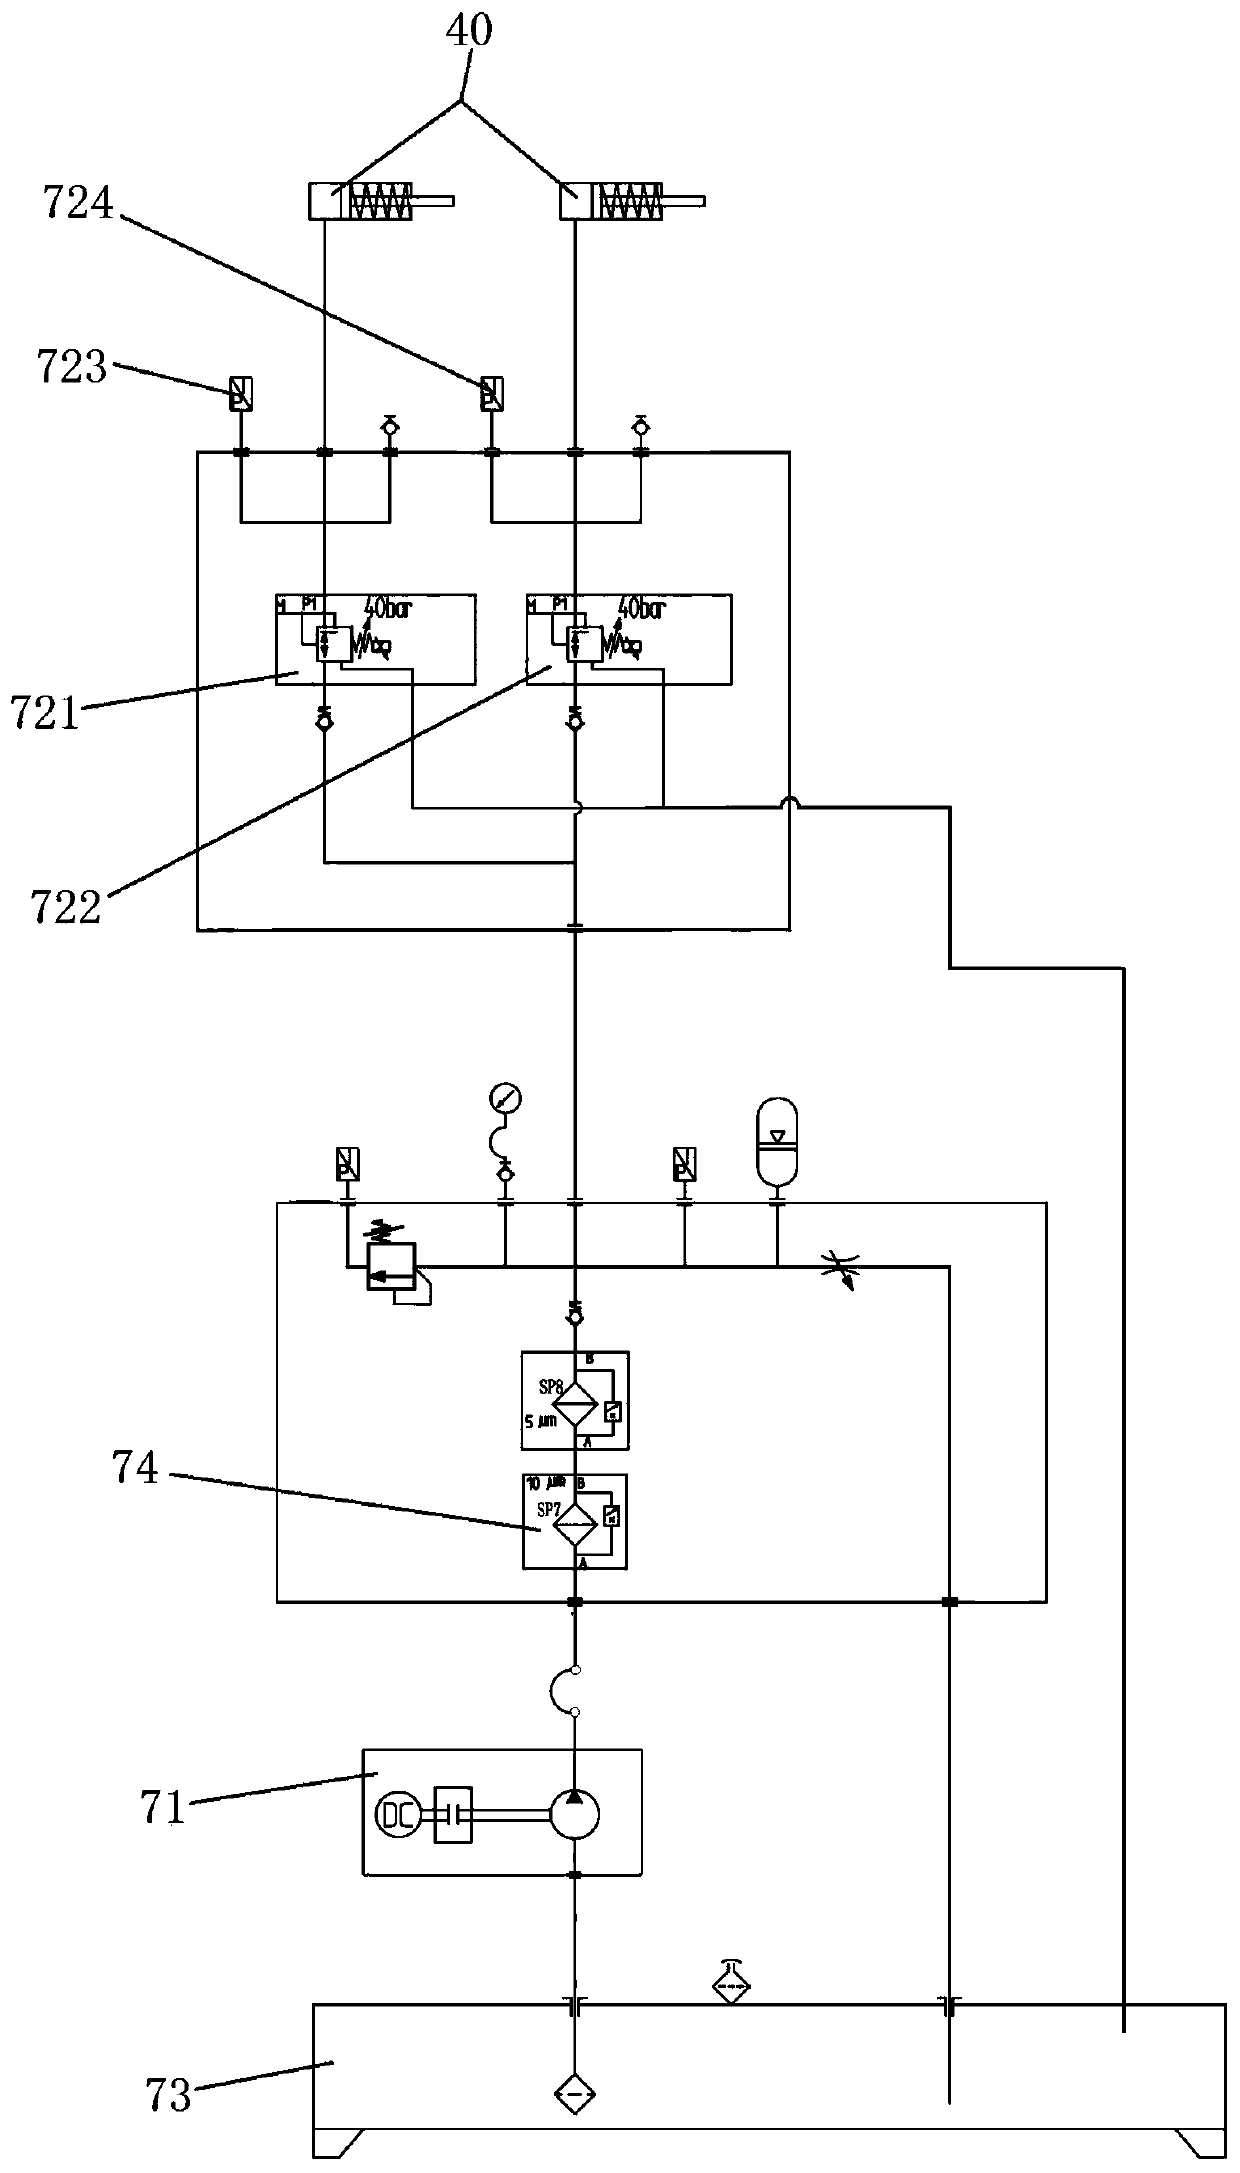 Two-gear transmission speed change control system